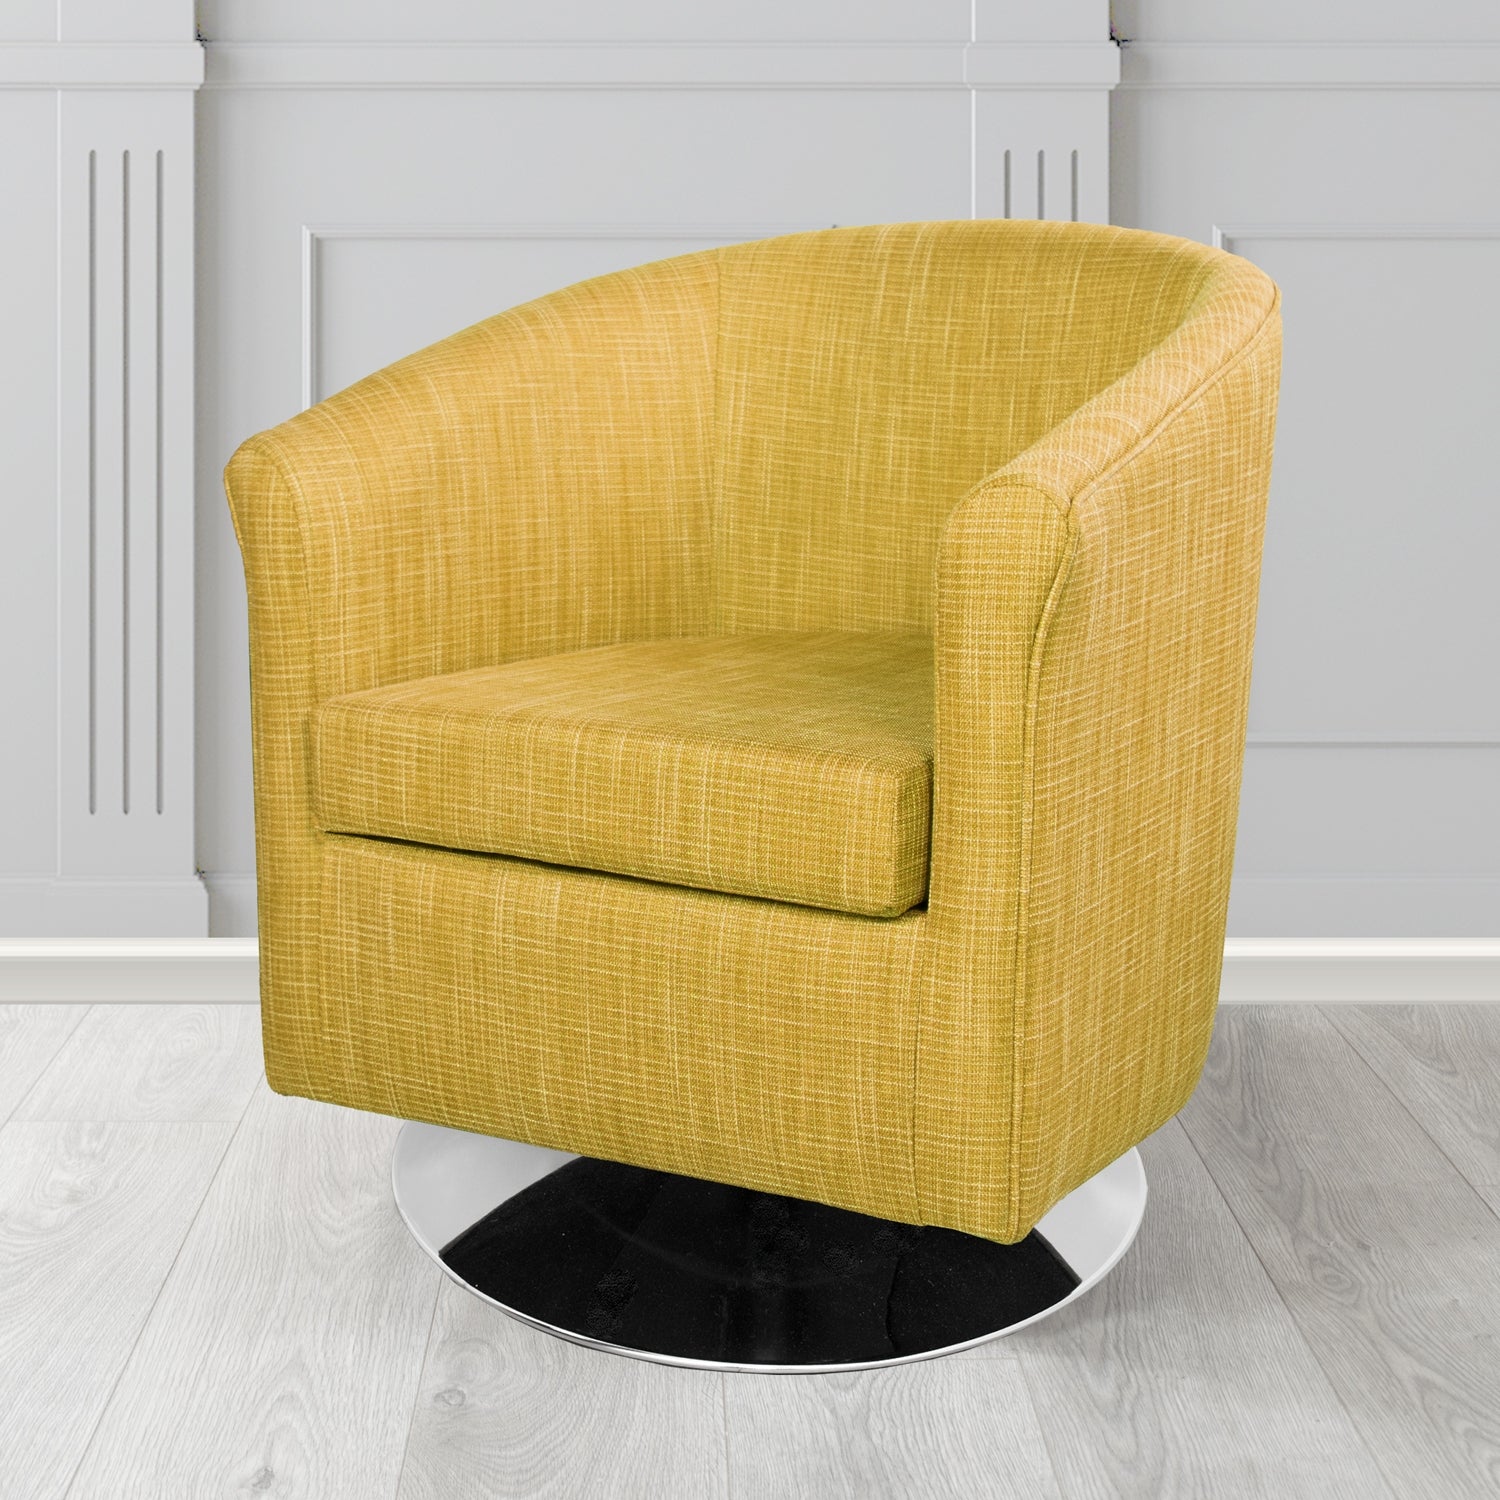 Tuscany Ravel Naples Contract Crib 5 Fabric Swivel Tub Chair - Antimicrobial & Water-Resistant - The Tub Chair Shop